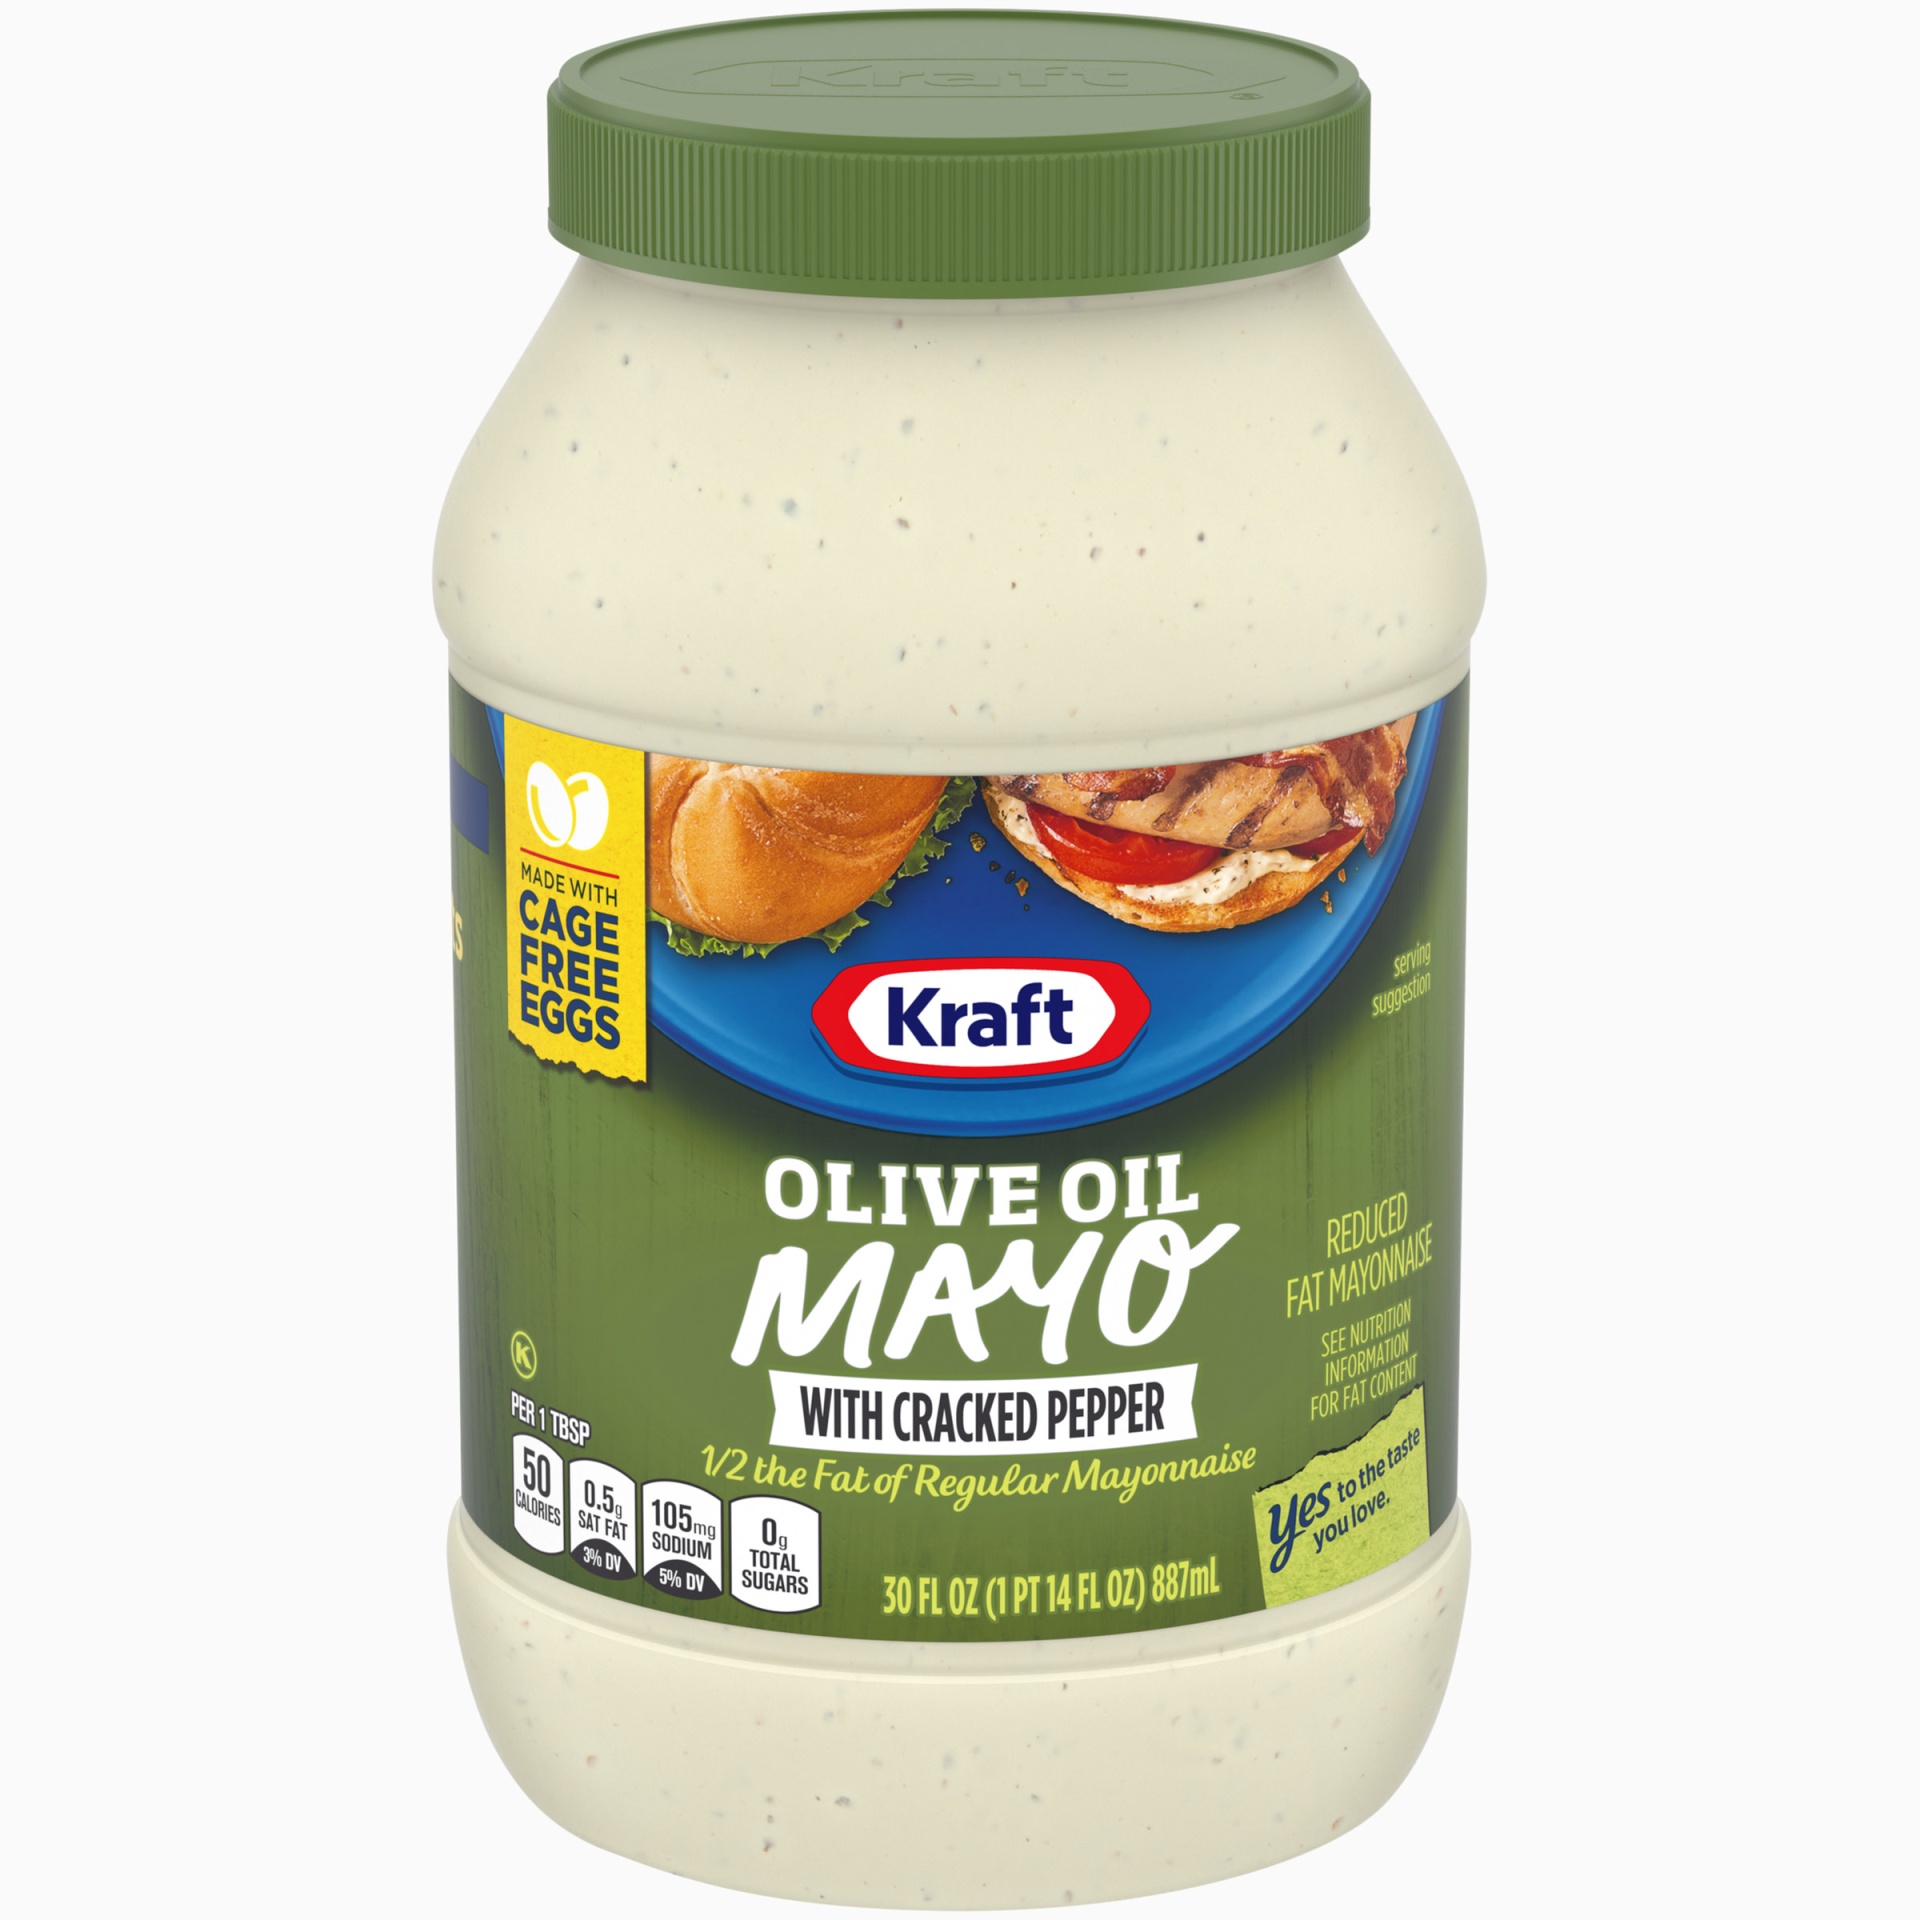 slide 1 of 1, Kraft Mayo with Olive Oil & Cracked Pepper Reduced Fat Mayonnaise Jar, 30 fl oz